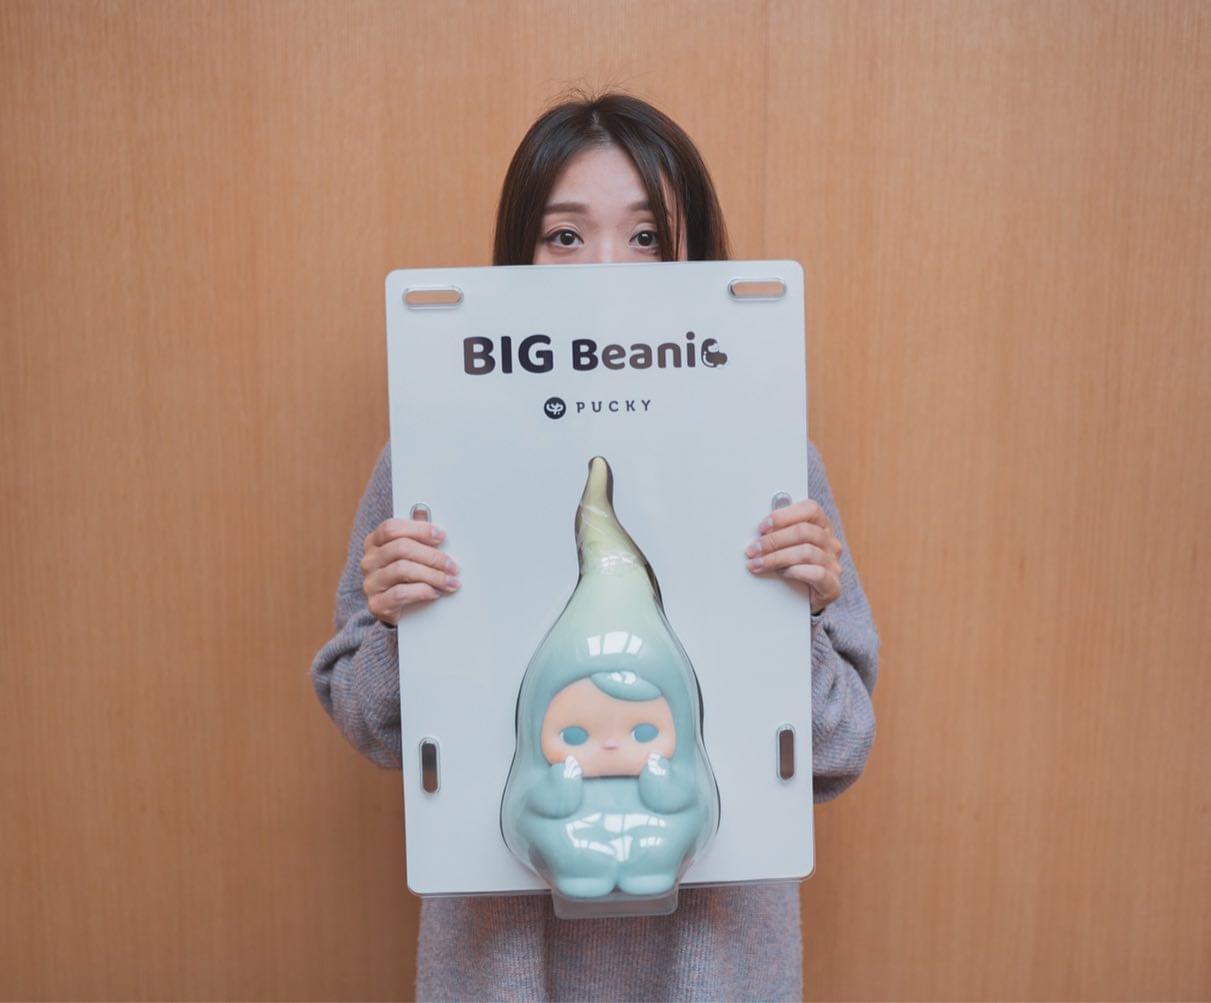 Big Beanie by Pucky